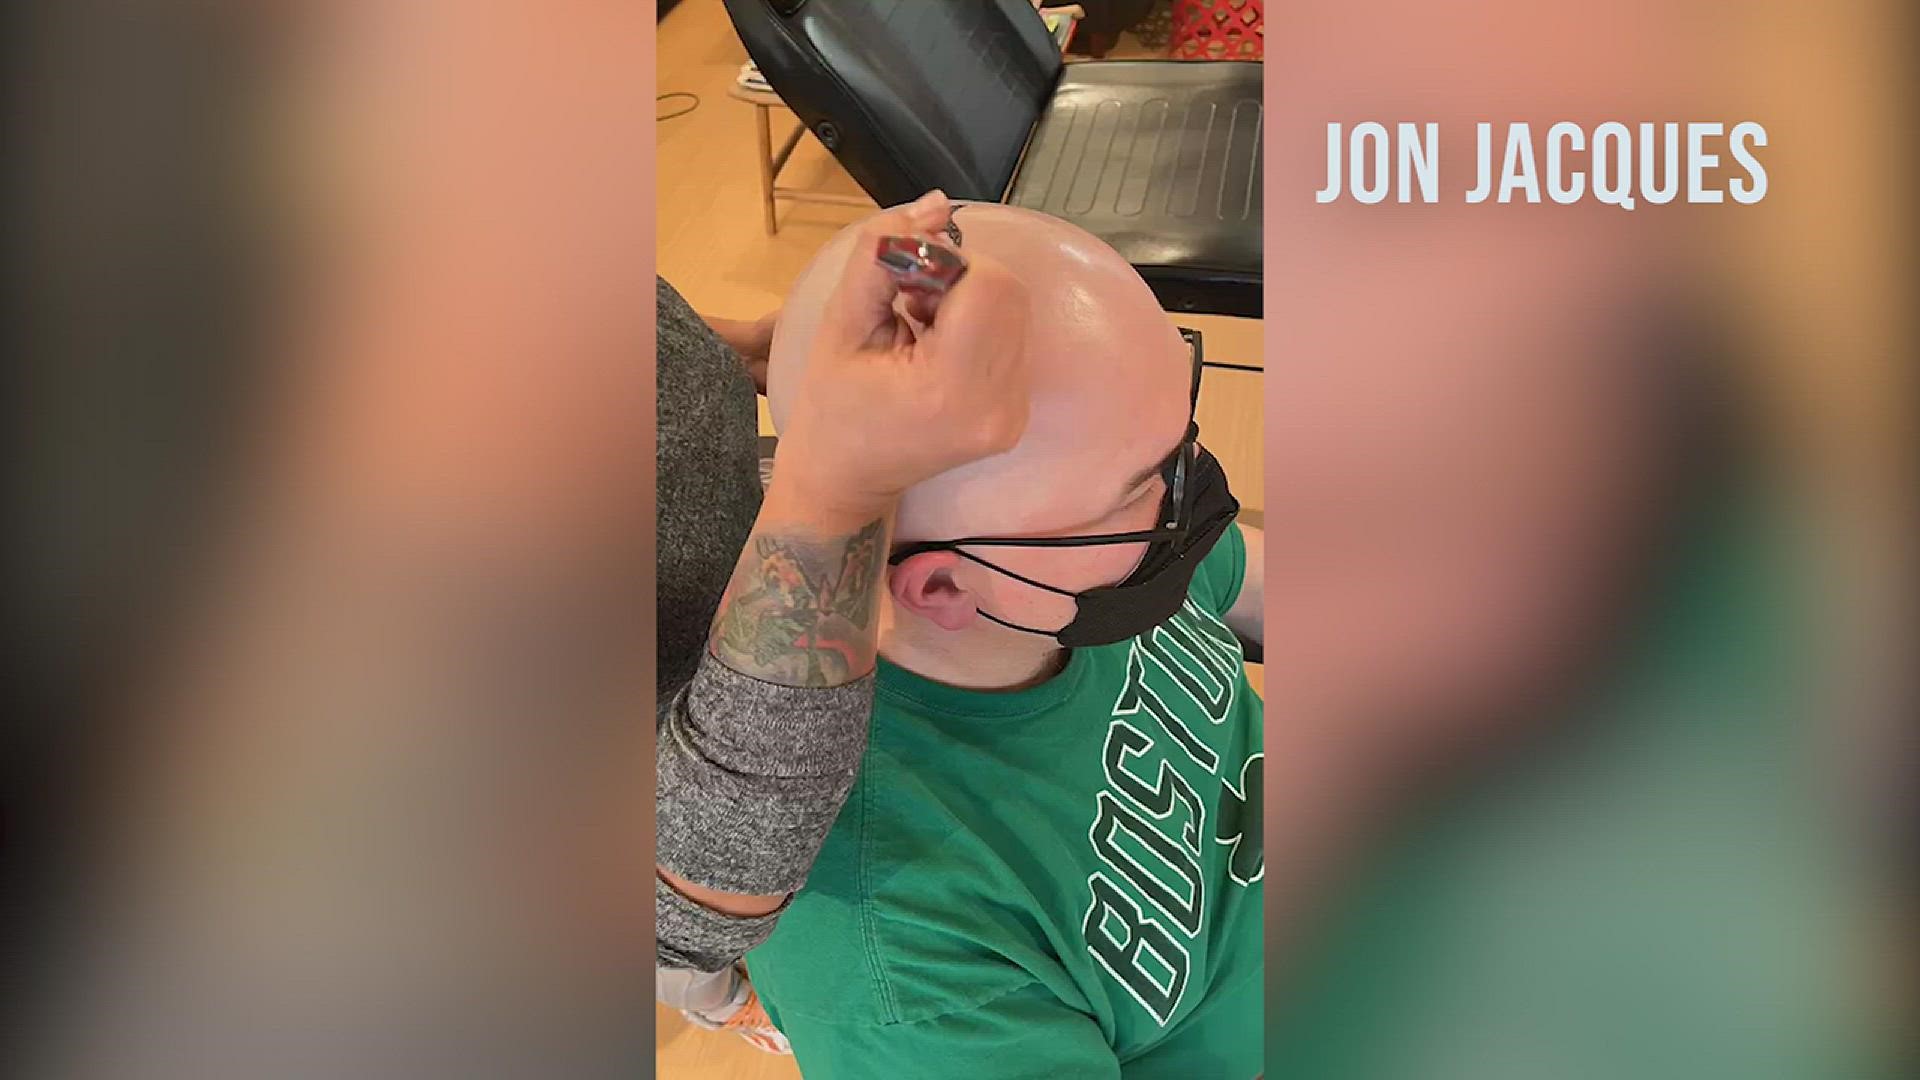 Jon Jacques, a math teacher at Biddeford High School, got a henna tattoo of the number pi on his head to benefit a good cause.